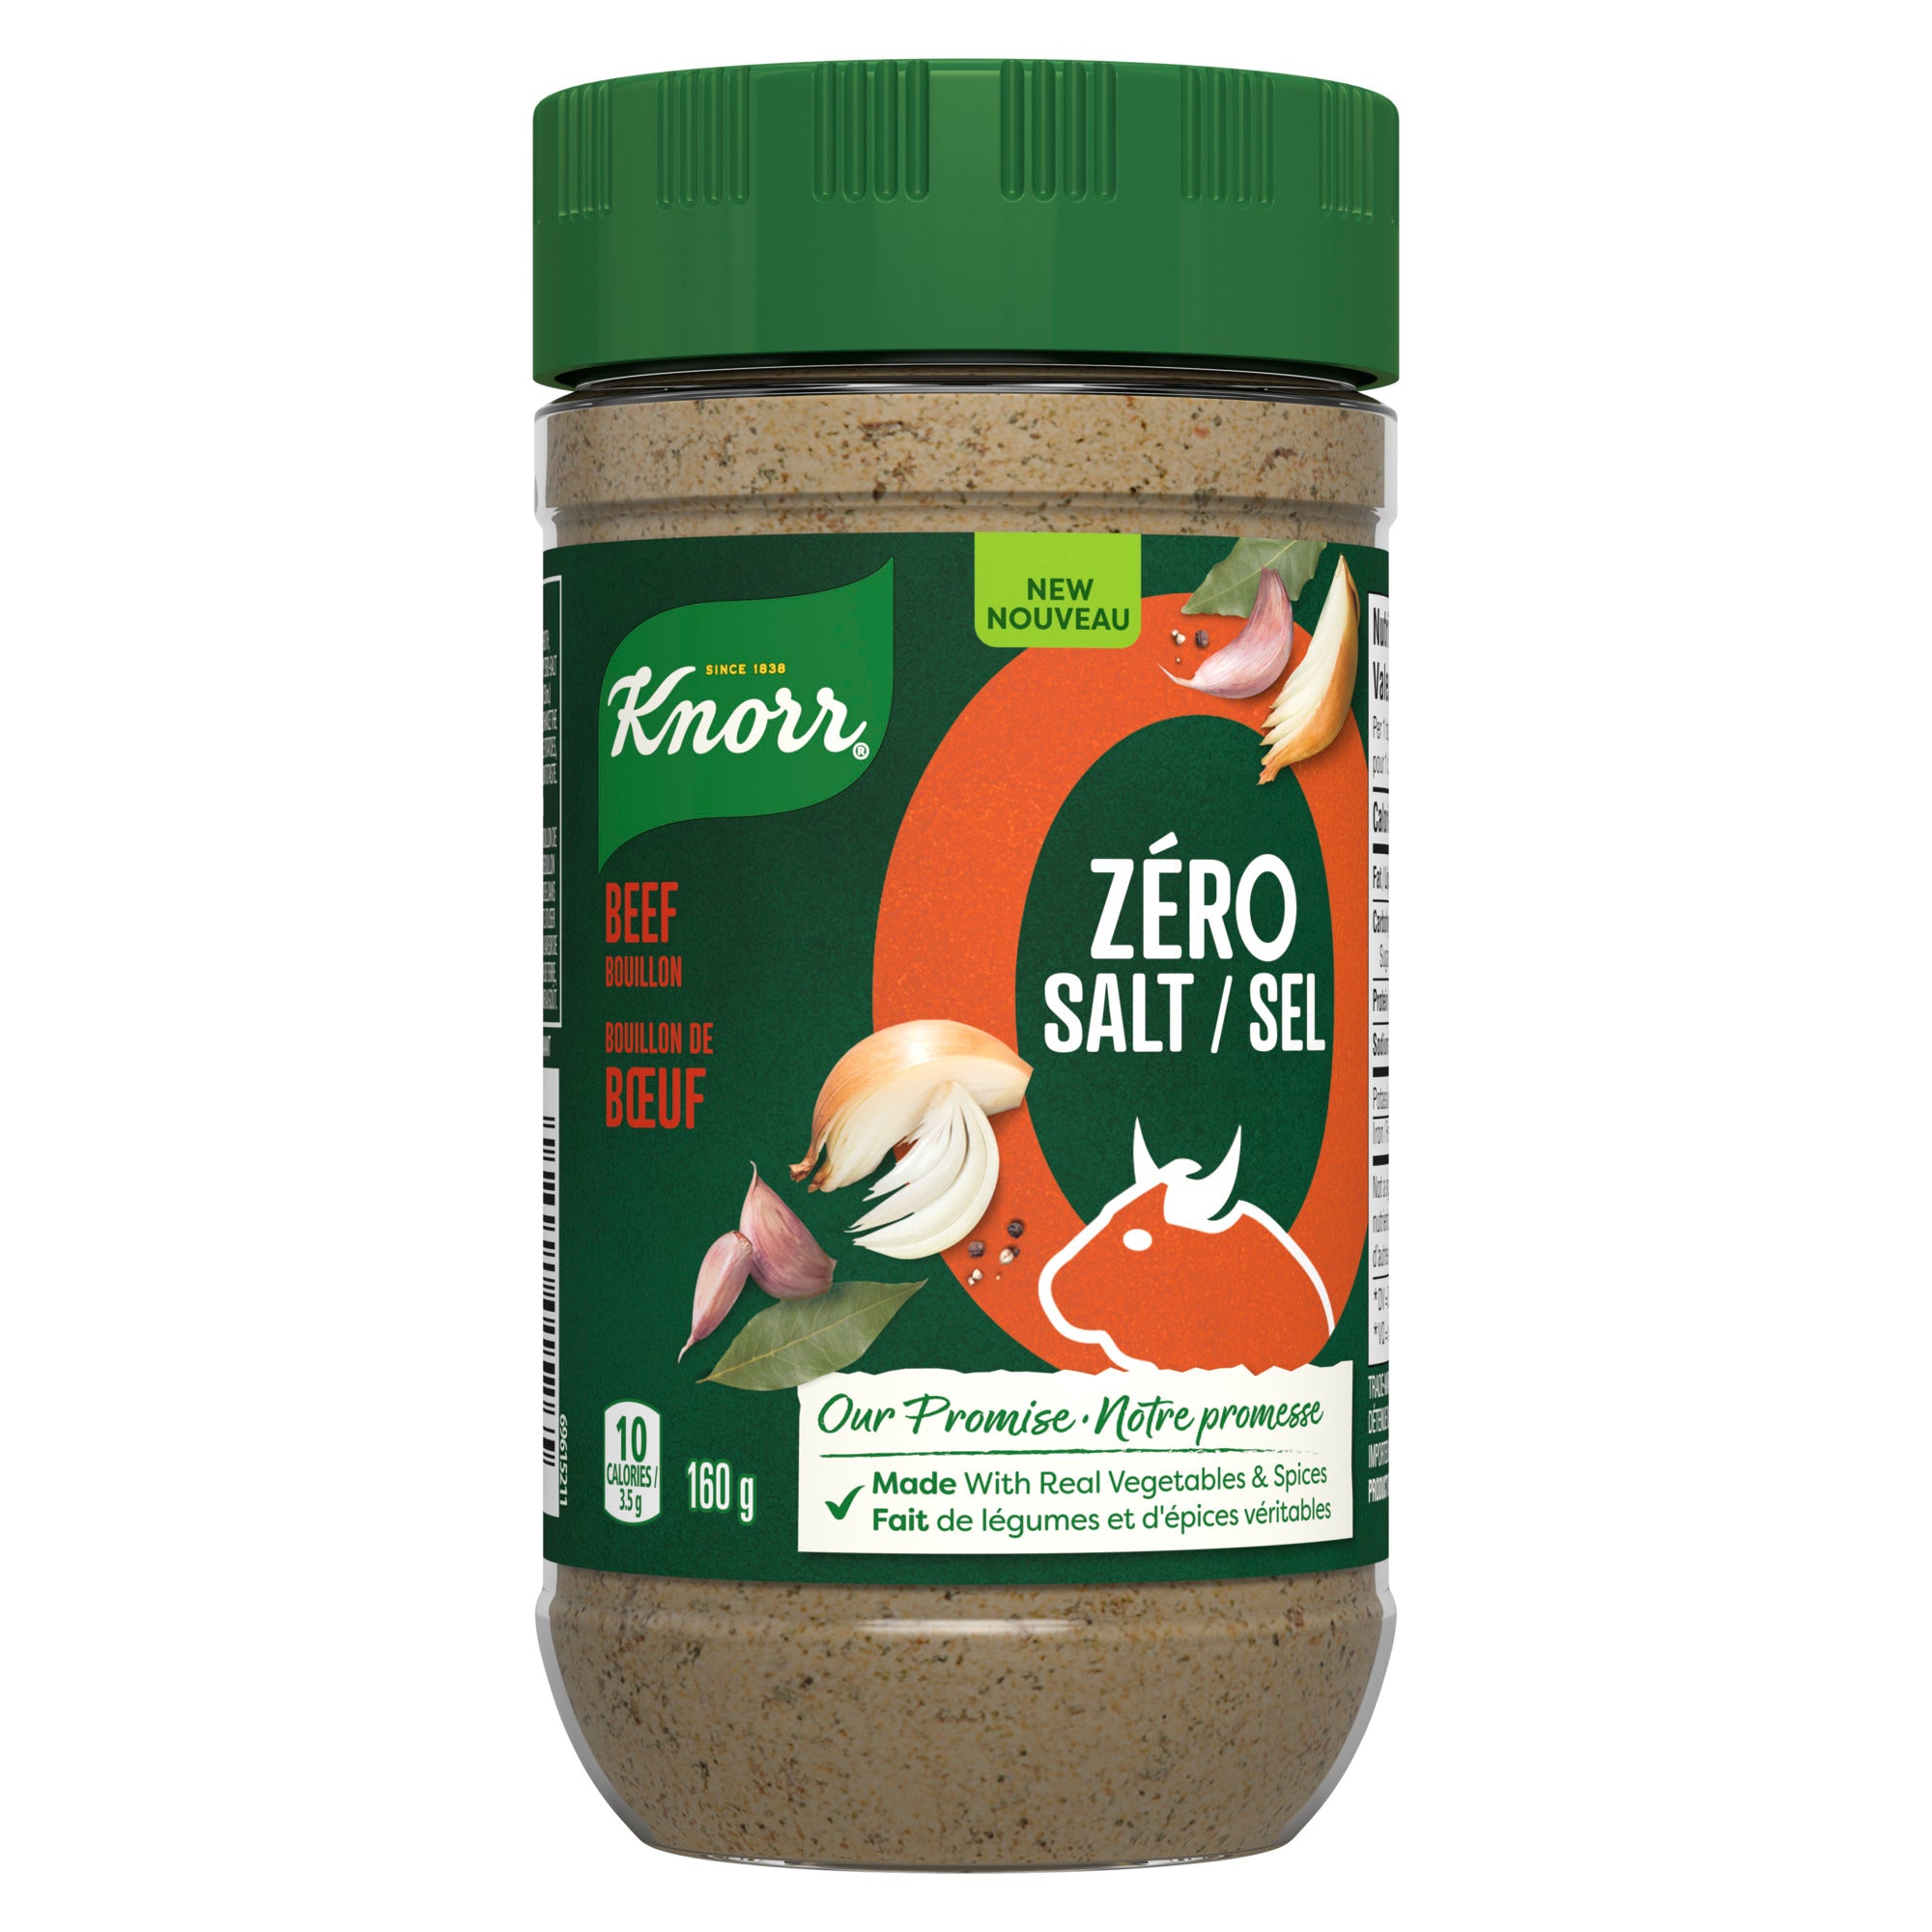 Showing the frontside view of the Knorr Zero Salt Beef Bouillon Powder 160g product.